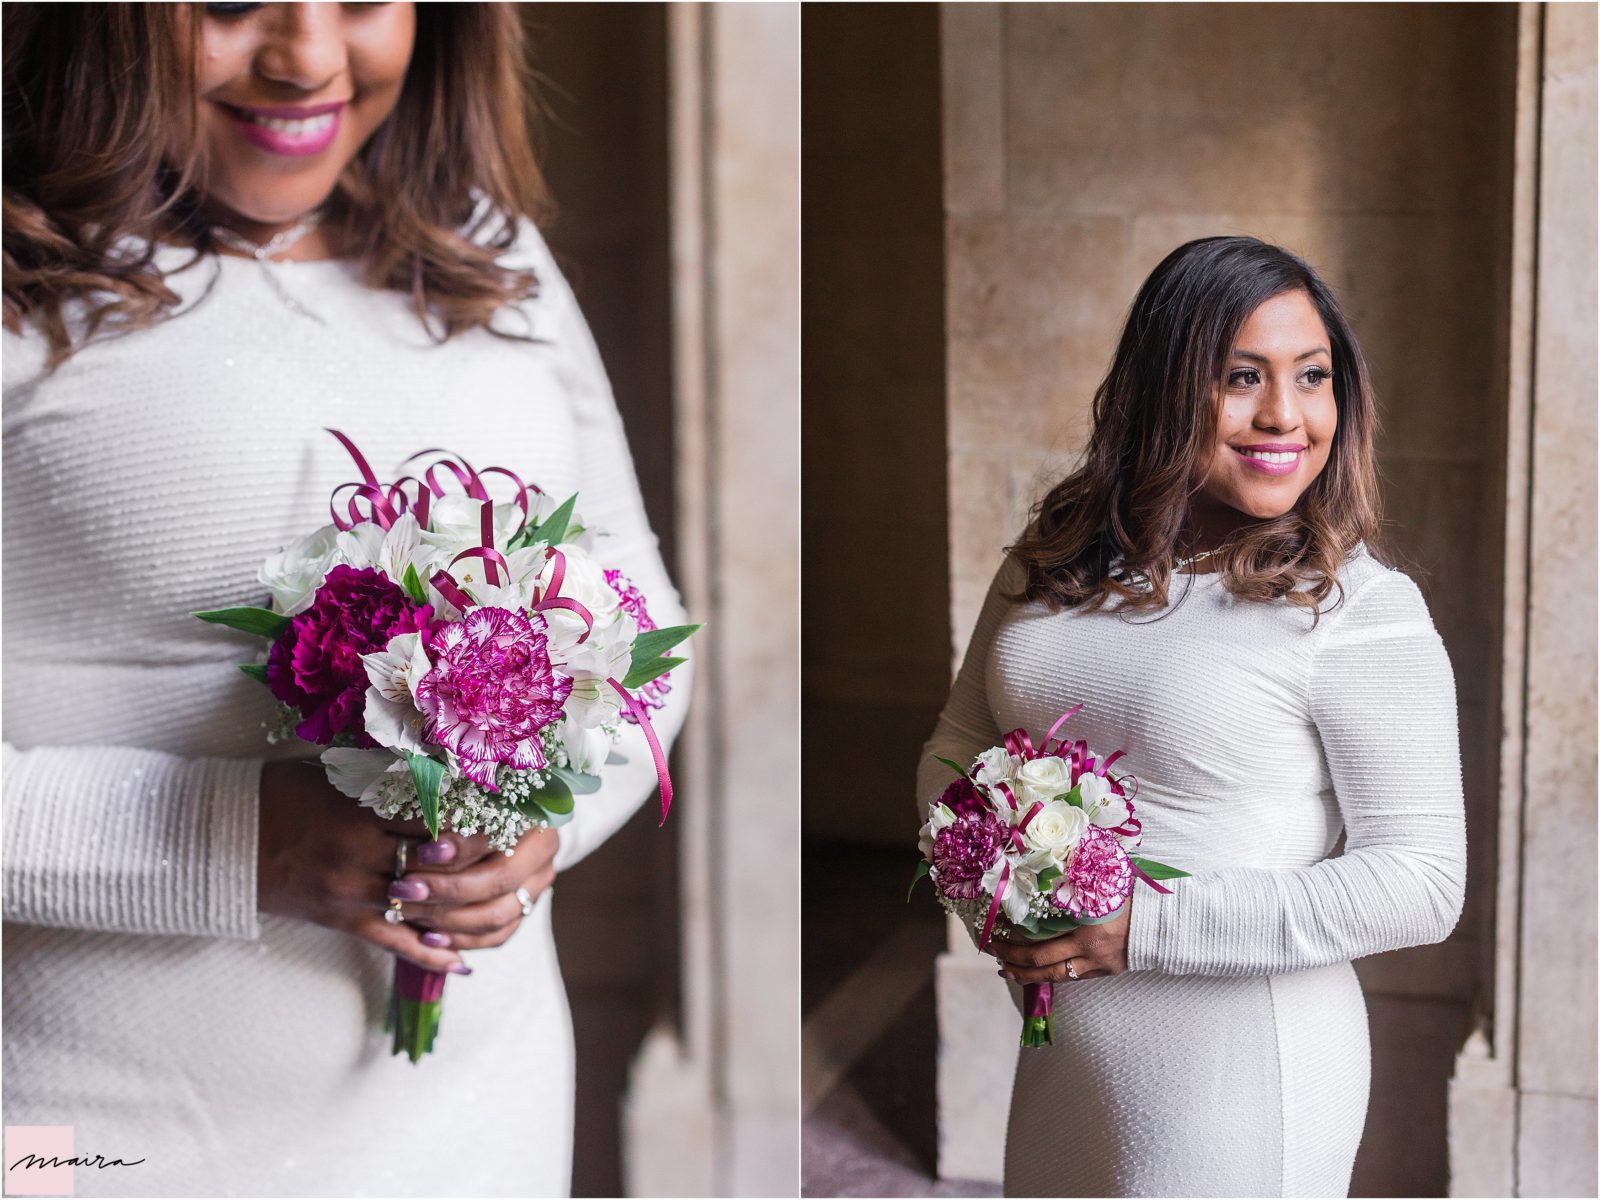 Beautiful bride portrait, Bride portrait, Bride photo, Chicago Courthouse wedding, City Hall wedding, Courthouse wedding photographer, Elope, Elopement photographer, City Hall Ceremony, Judge, Chicago Wedding, Married